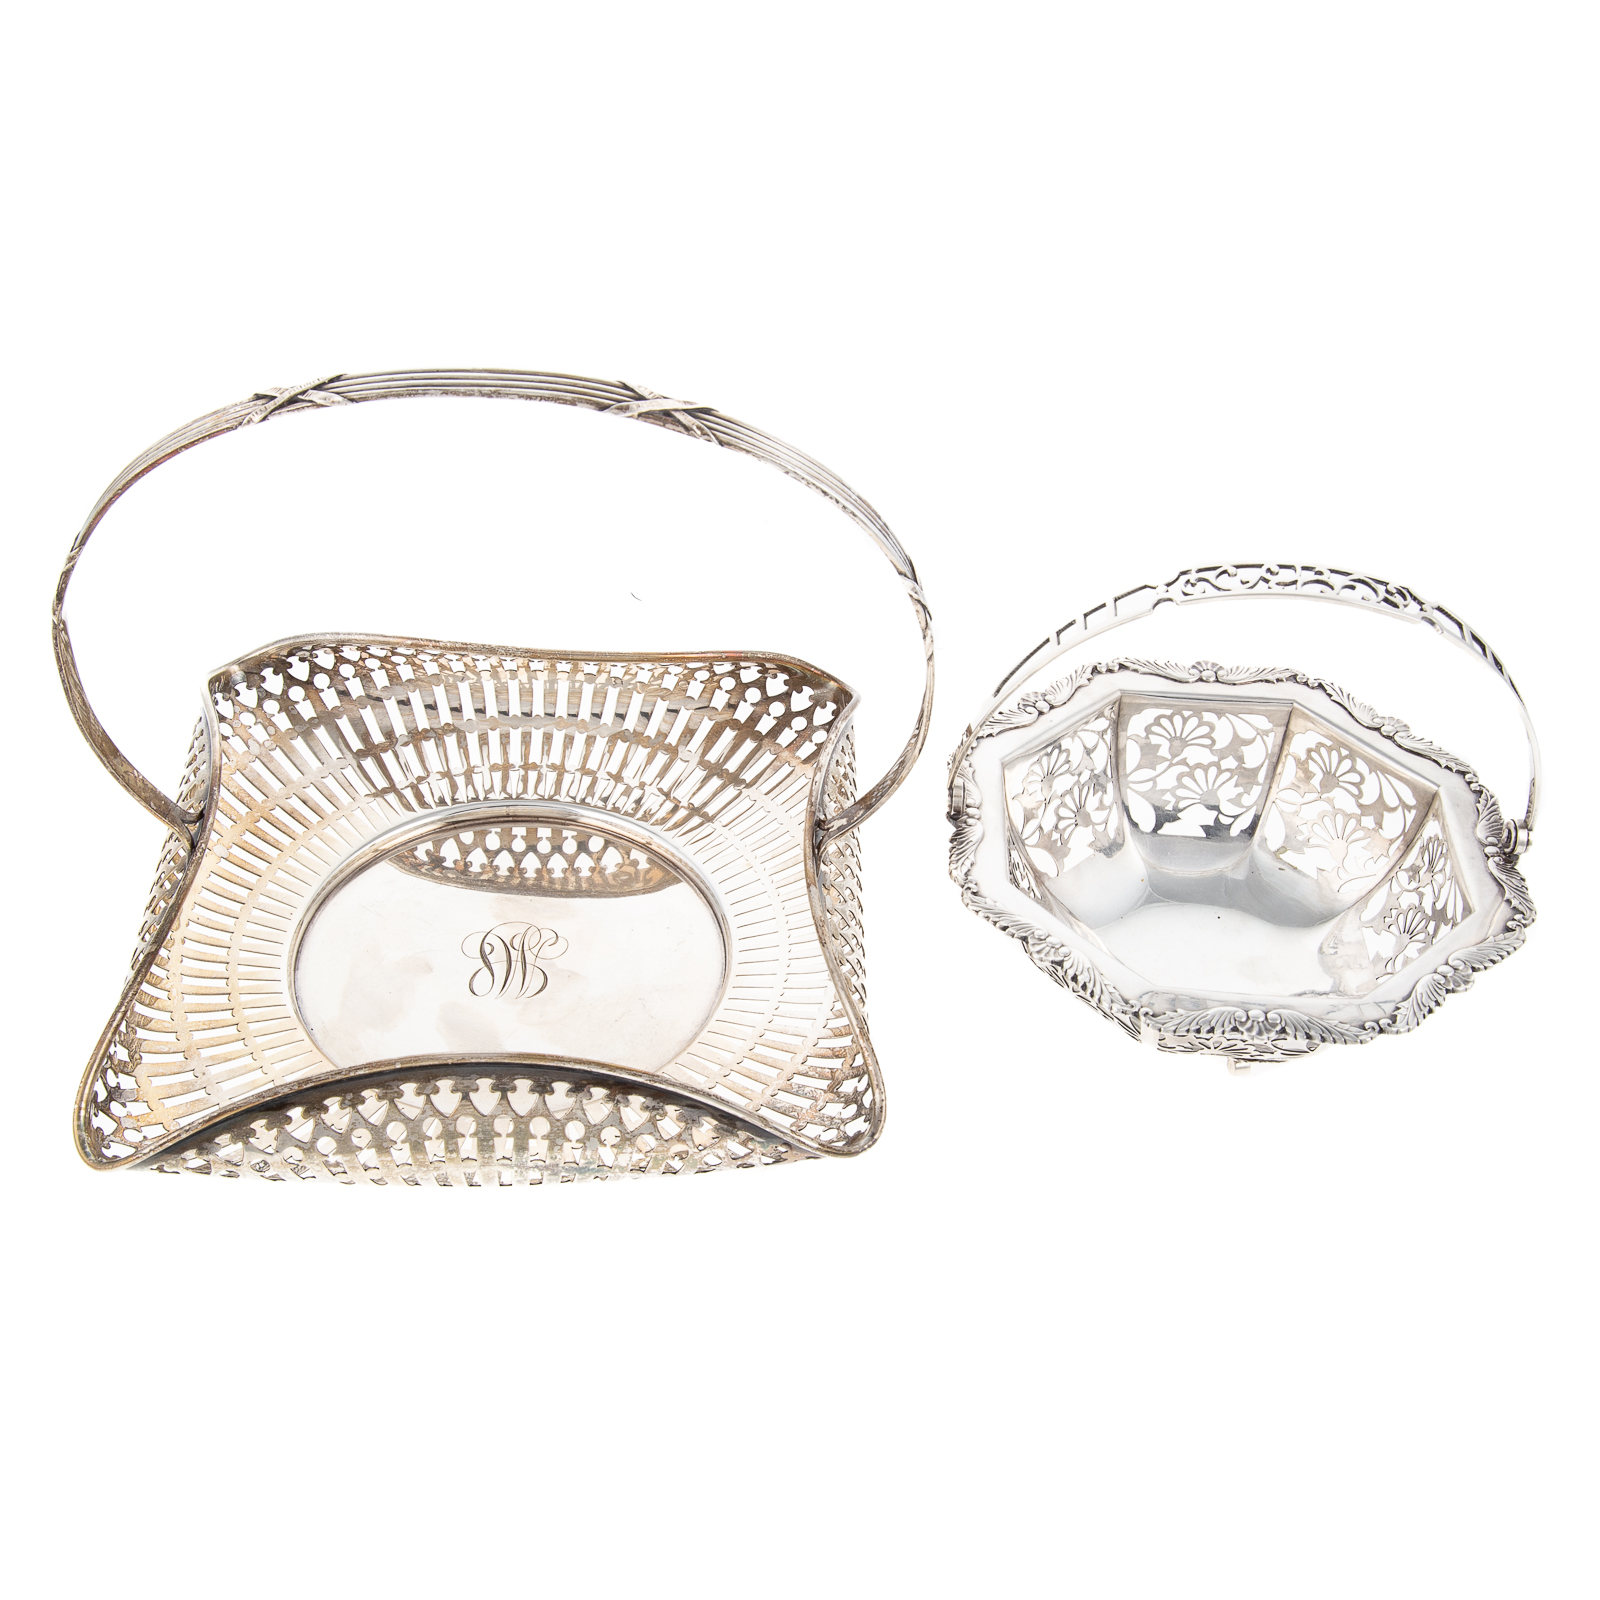 TWO STERLING BASKETS Including